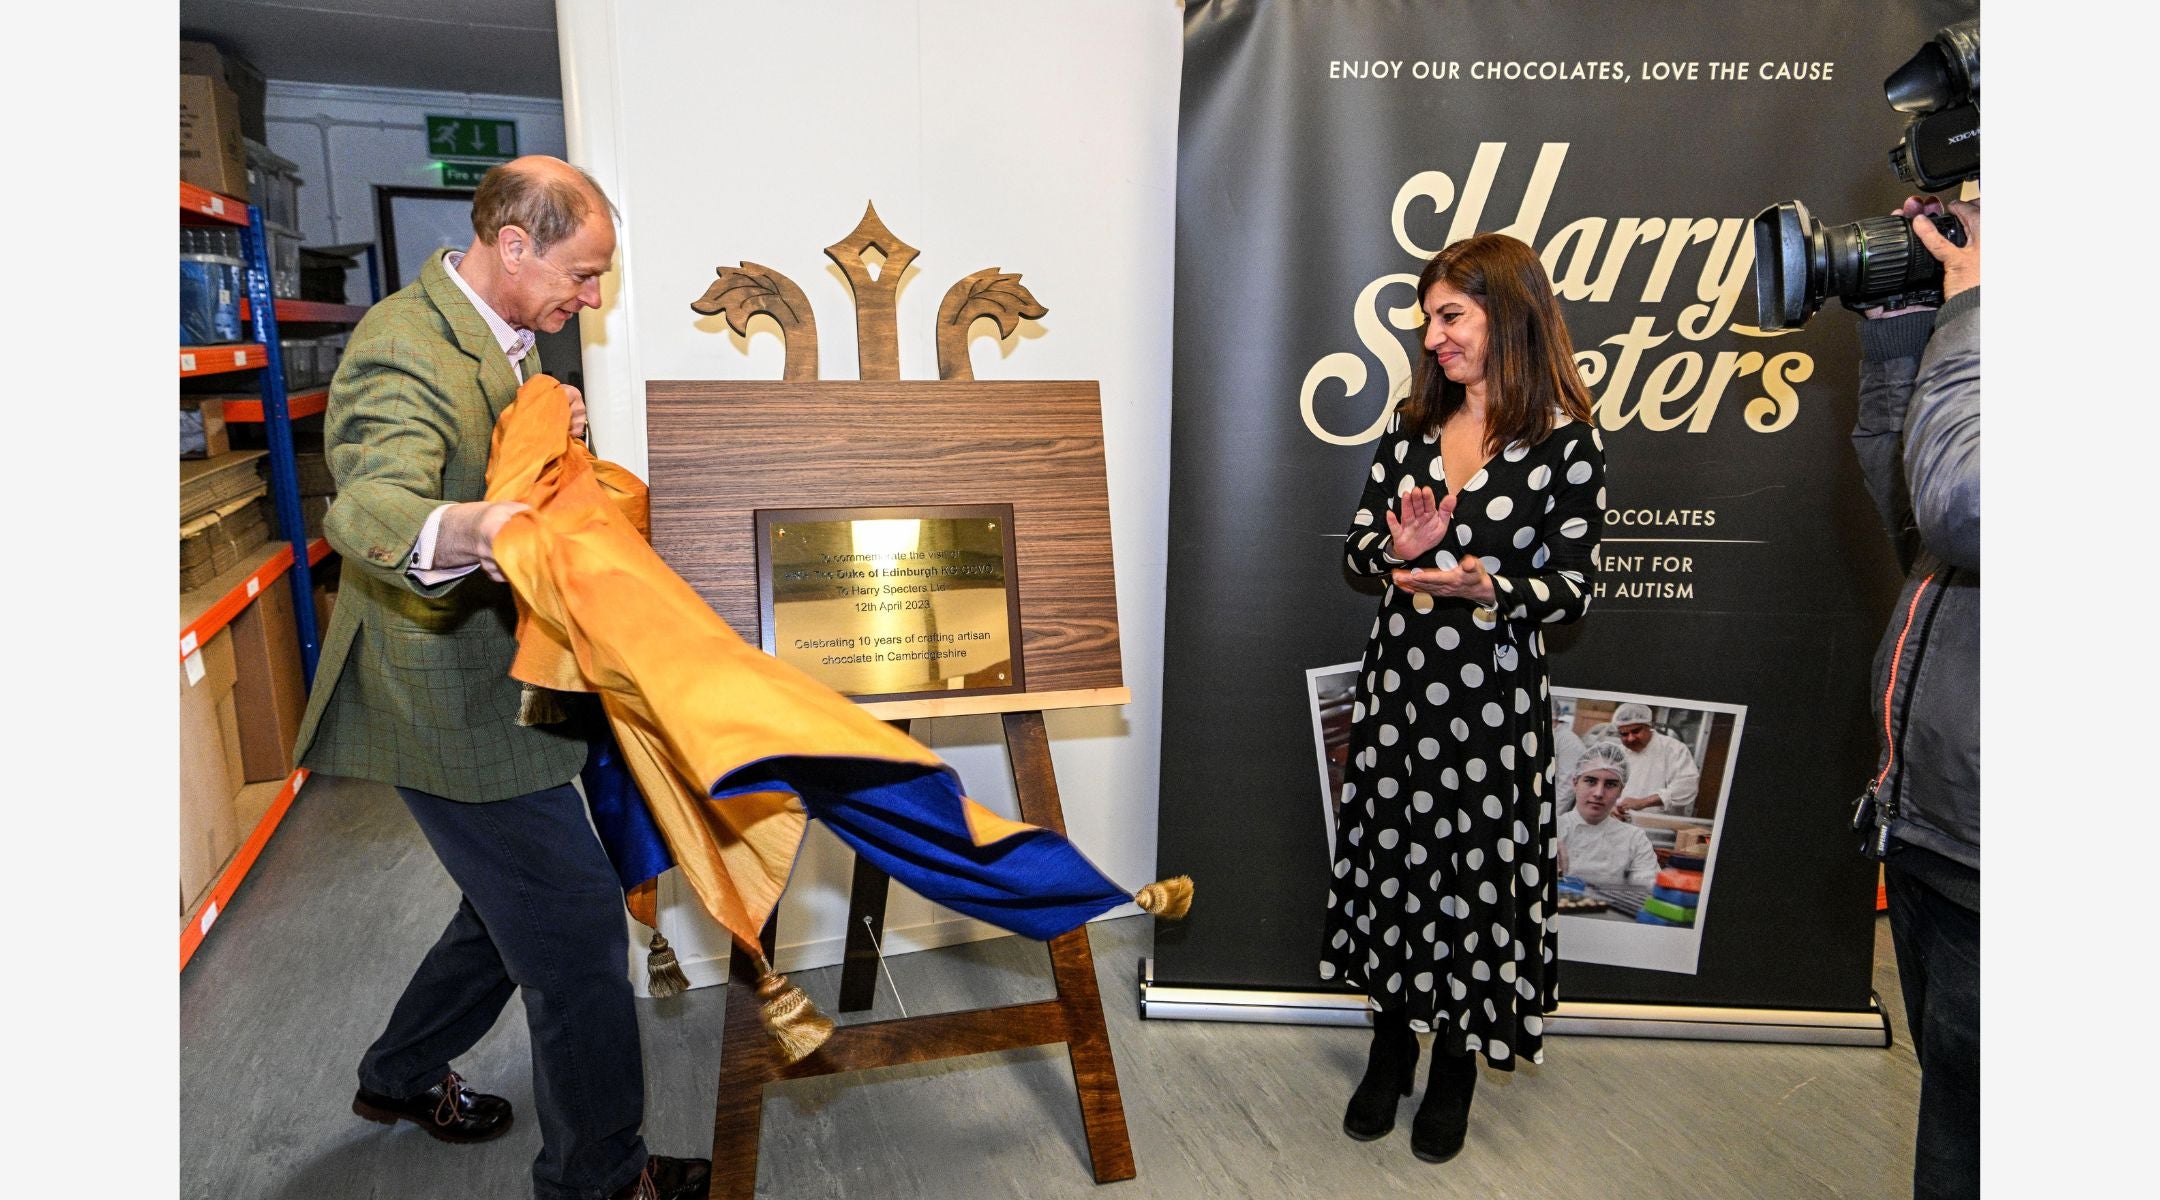 HRH Prince Edward unveils a plaque at Harry Specters chocolate factory